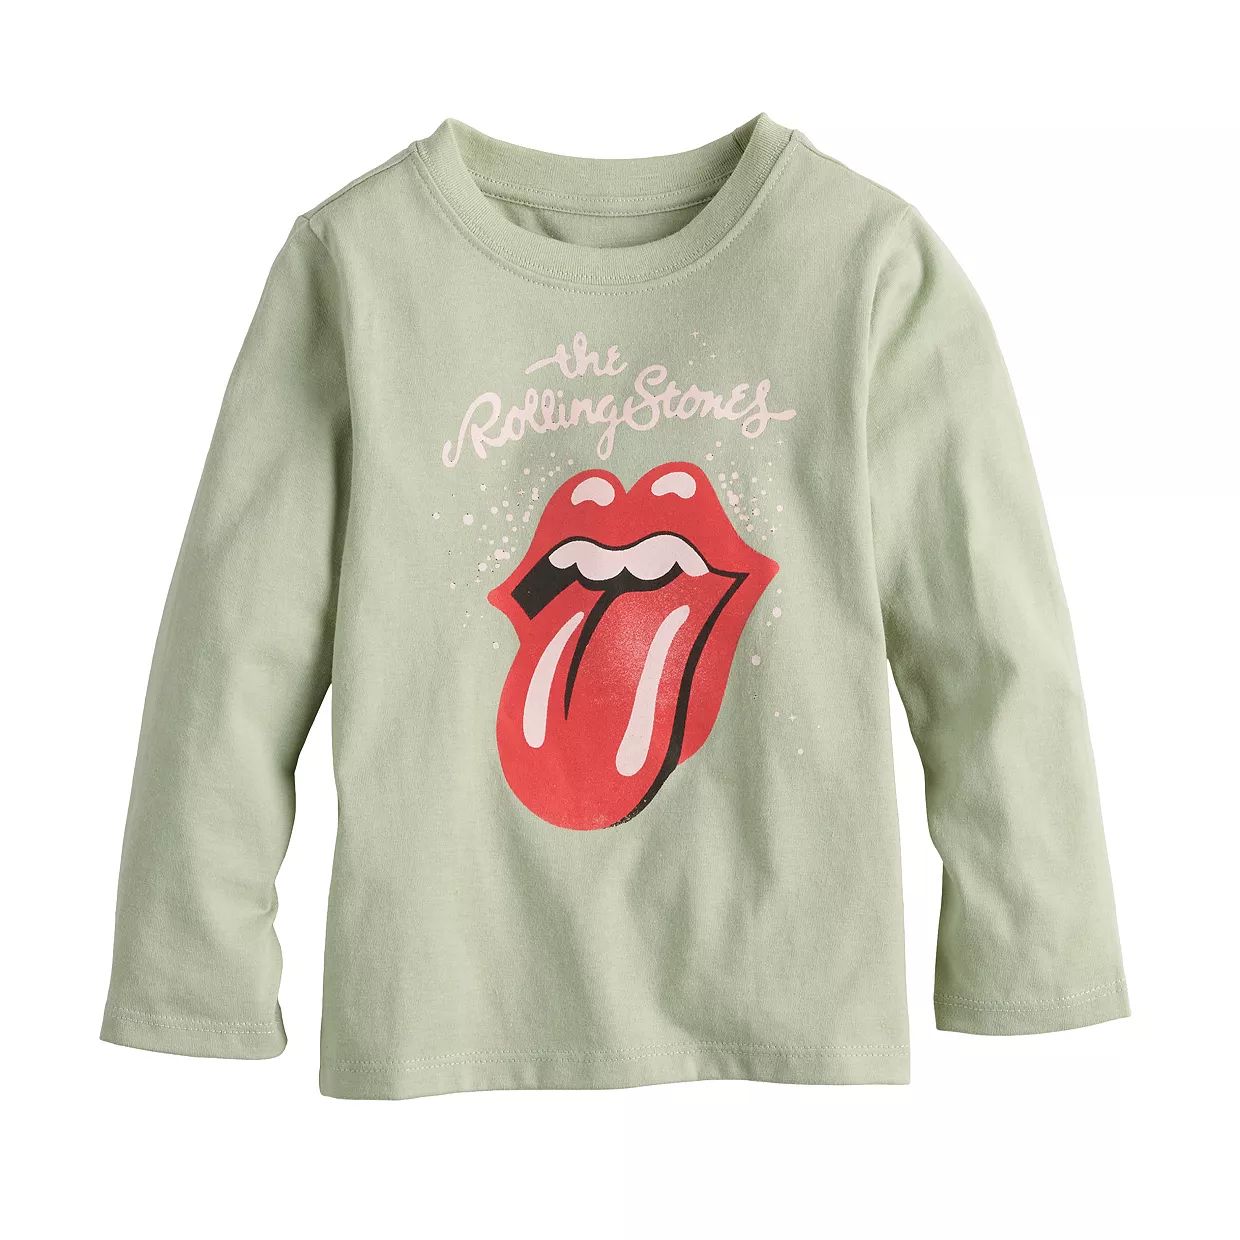 Baby & Toddler Boy The Rolling Stones Graphic Tee | Kohl's